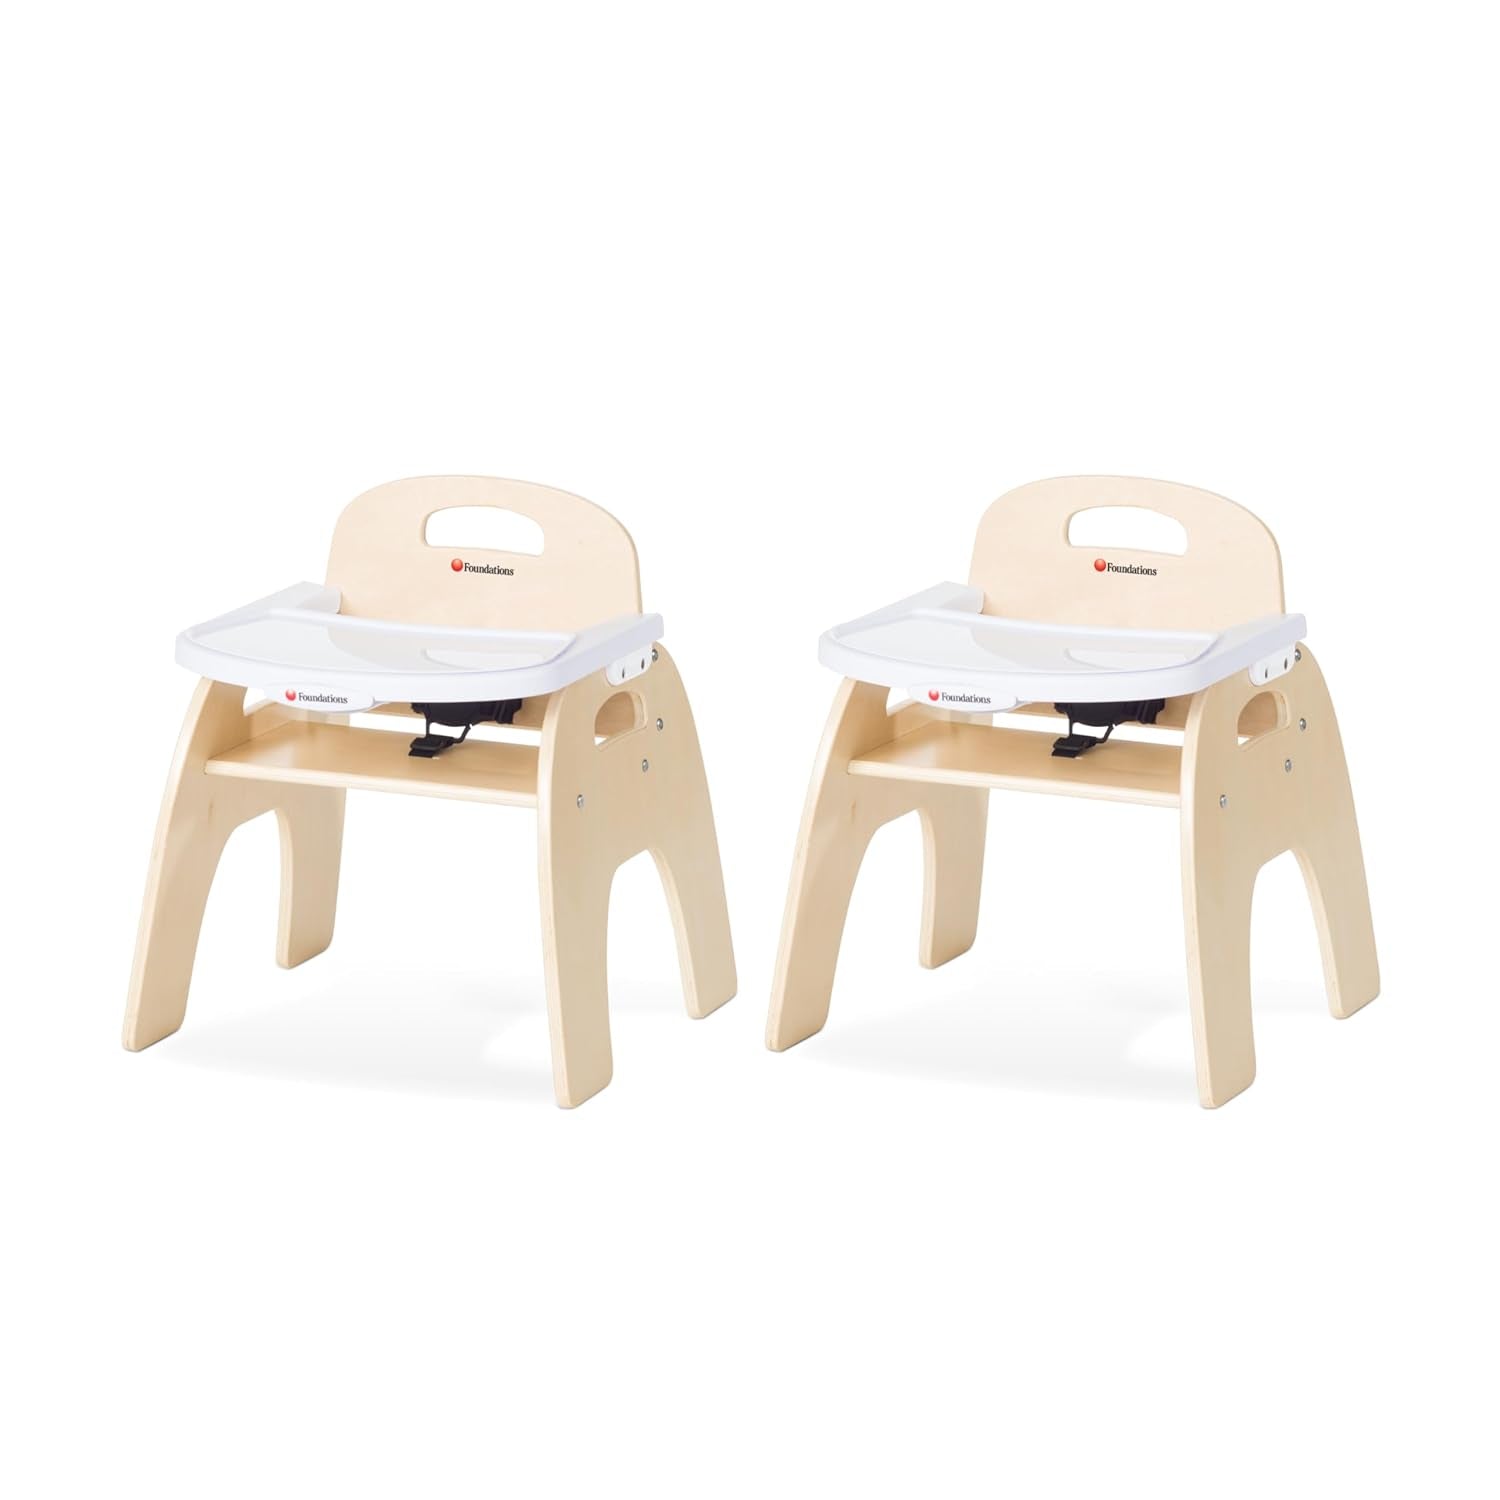 Easy Serve Low Wood Feeding Chairs Multipack, Adjustable Harness, Removable Dishwasher Safe Tray, No-Tip Base, Stackable Toddler Chairs, 2 Pack (11 Inch)